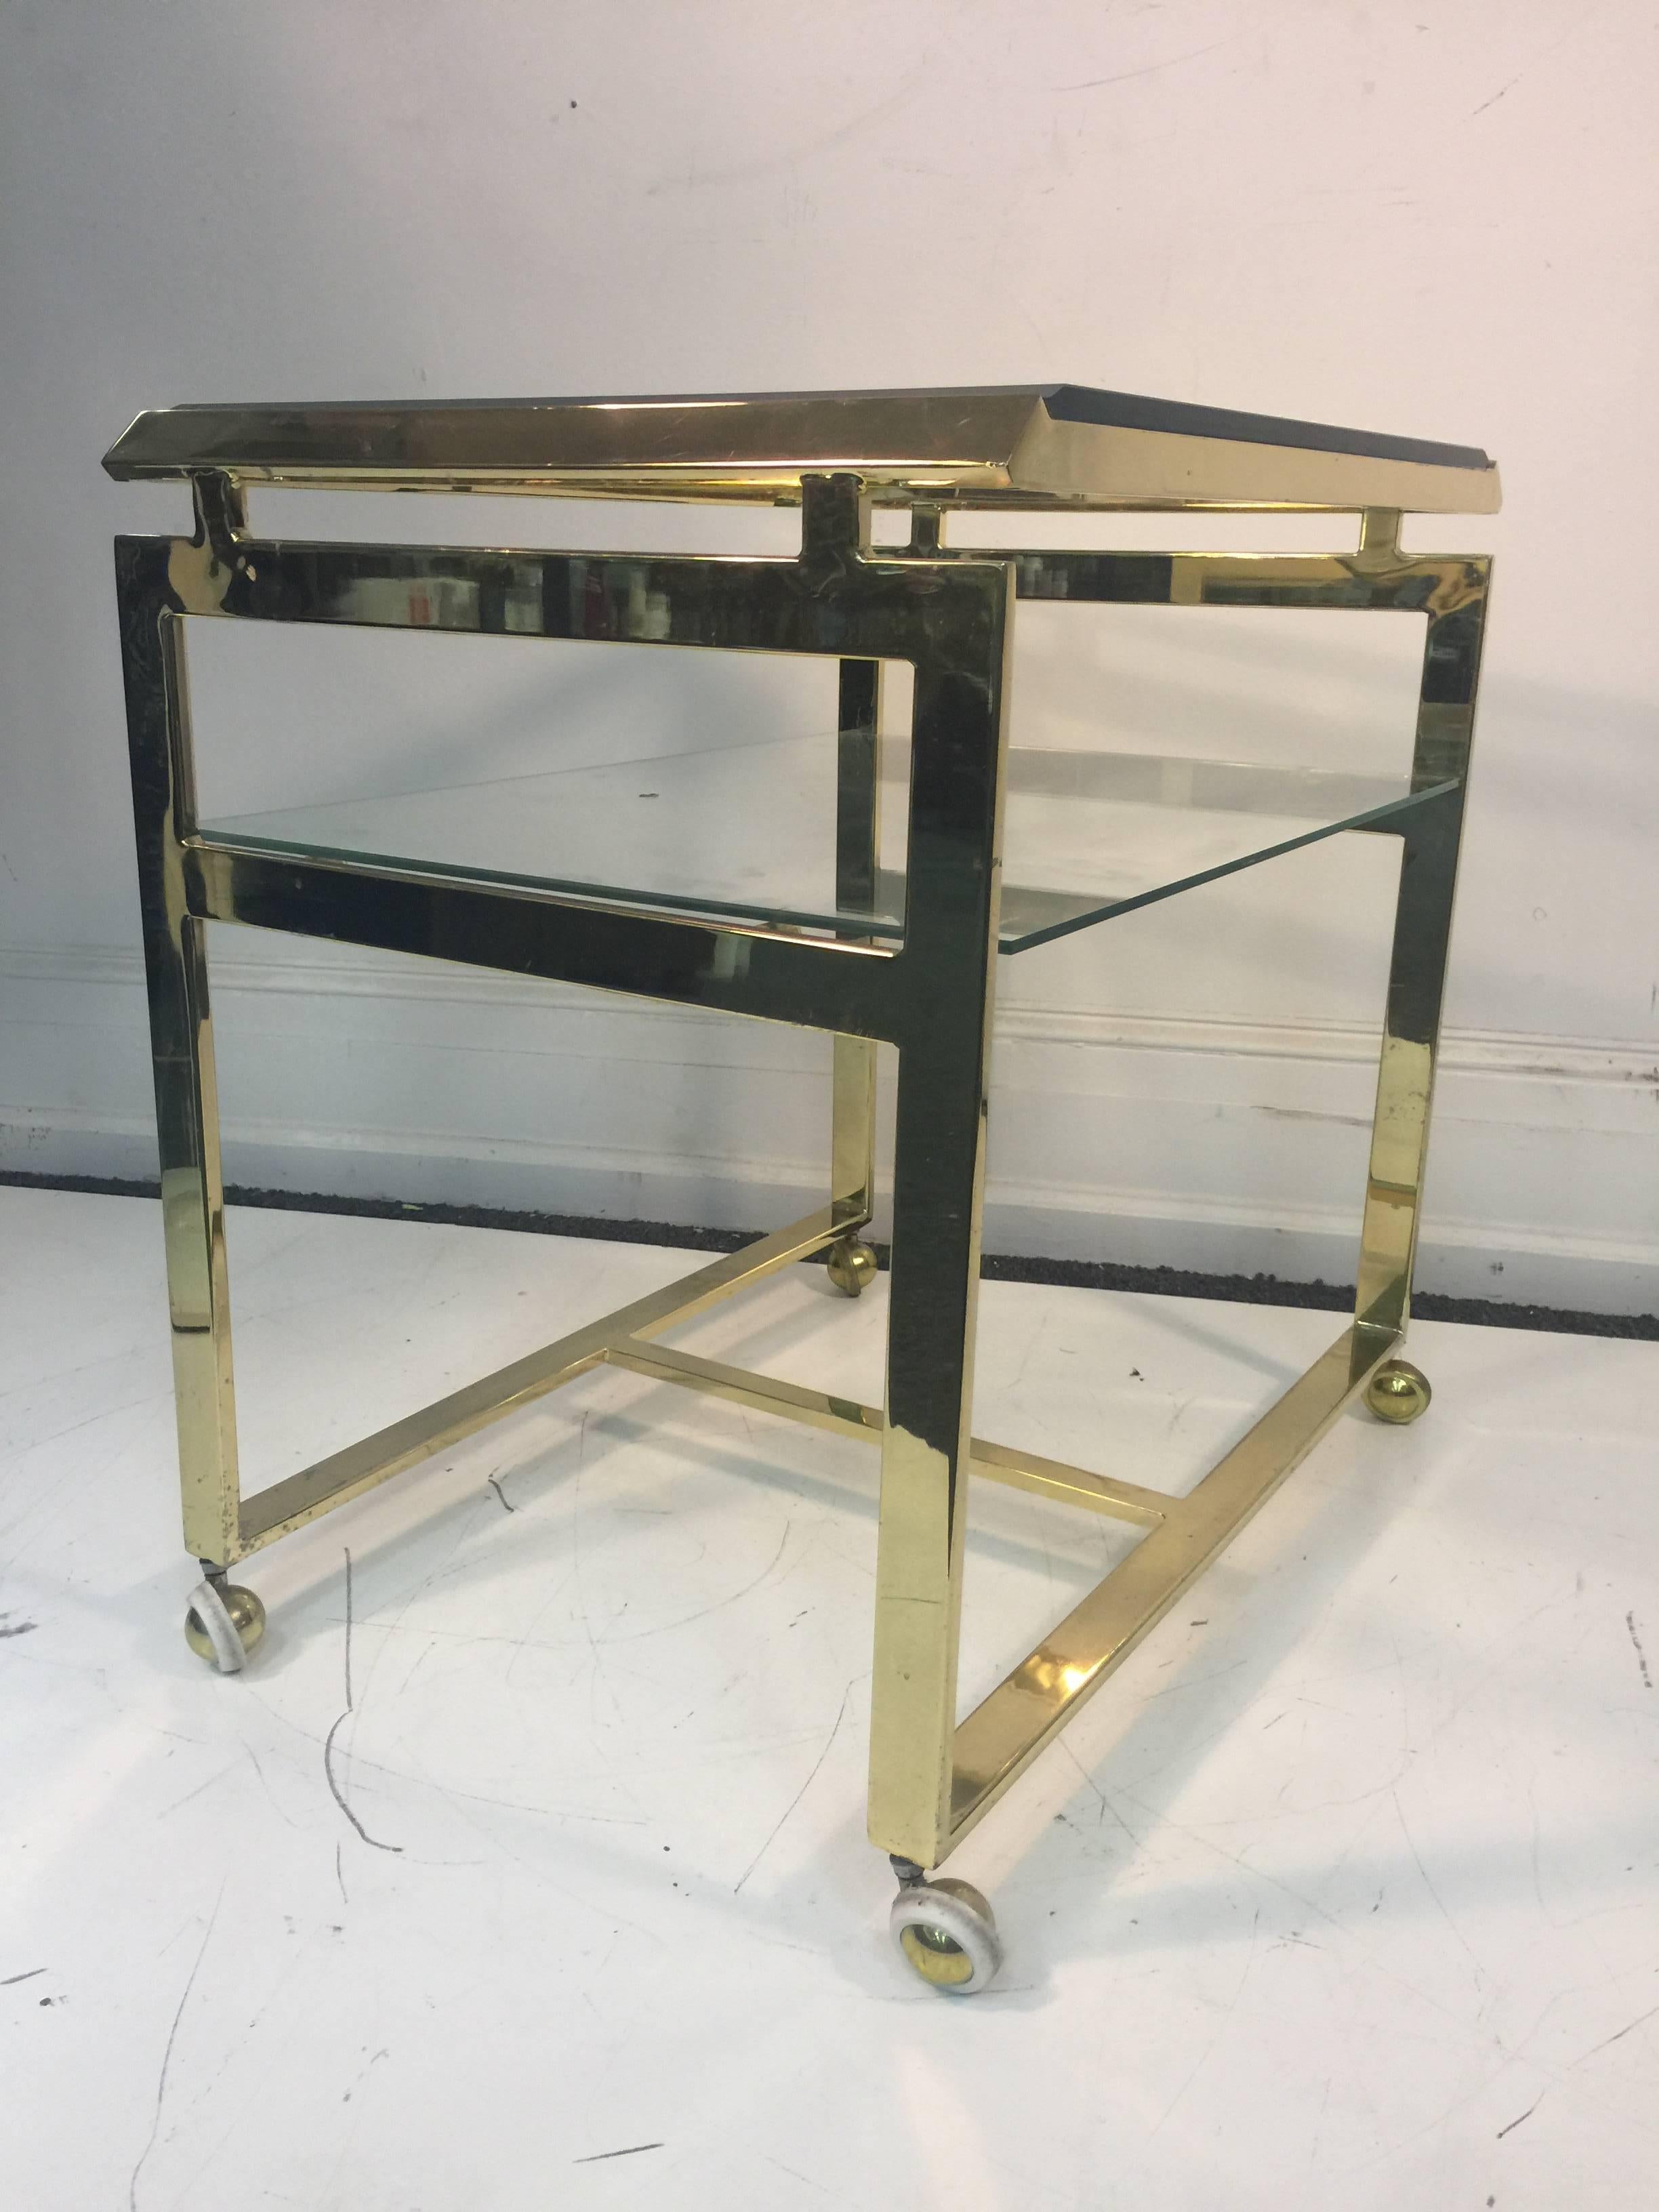 Striking Pair of Brass Tea or Serving Carts by Milo Baughman In Good Condition For Sale In Mount Penn, PA